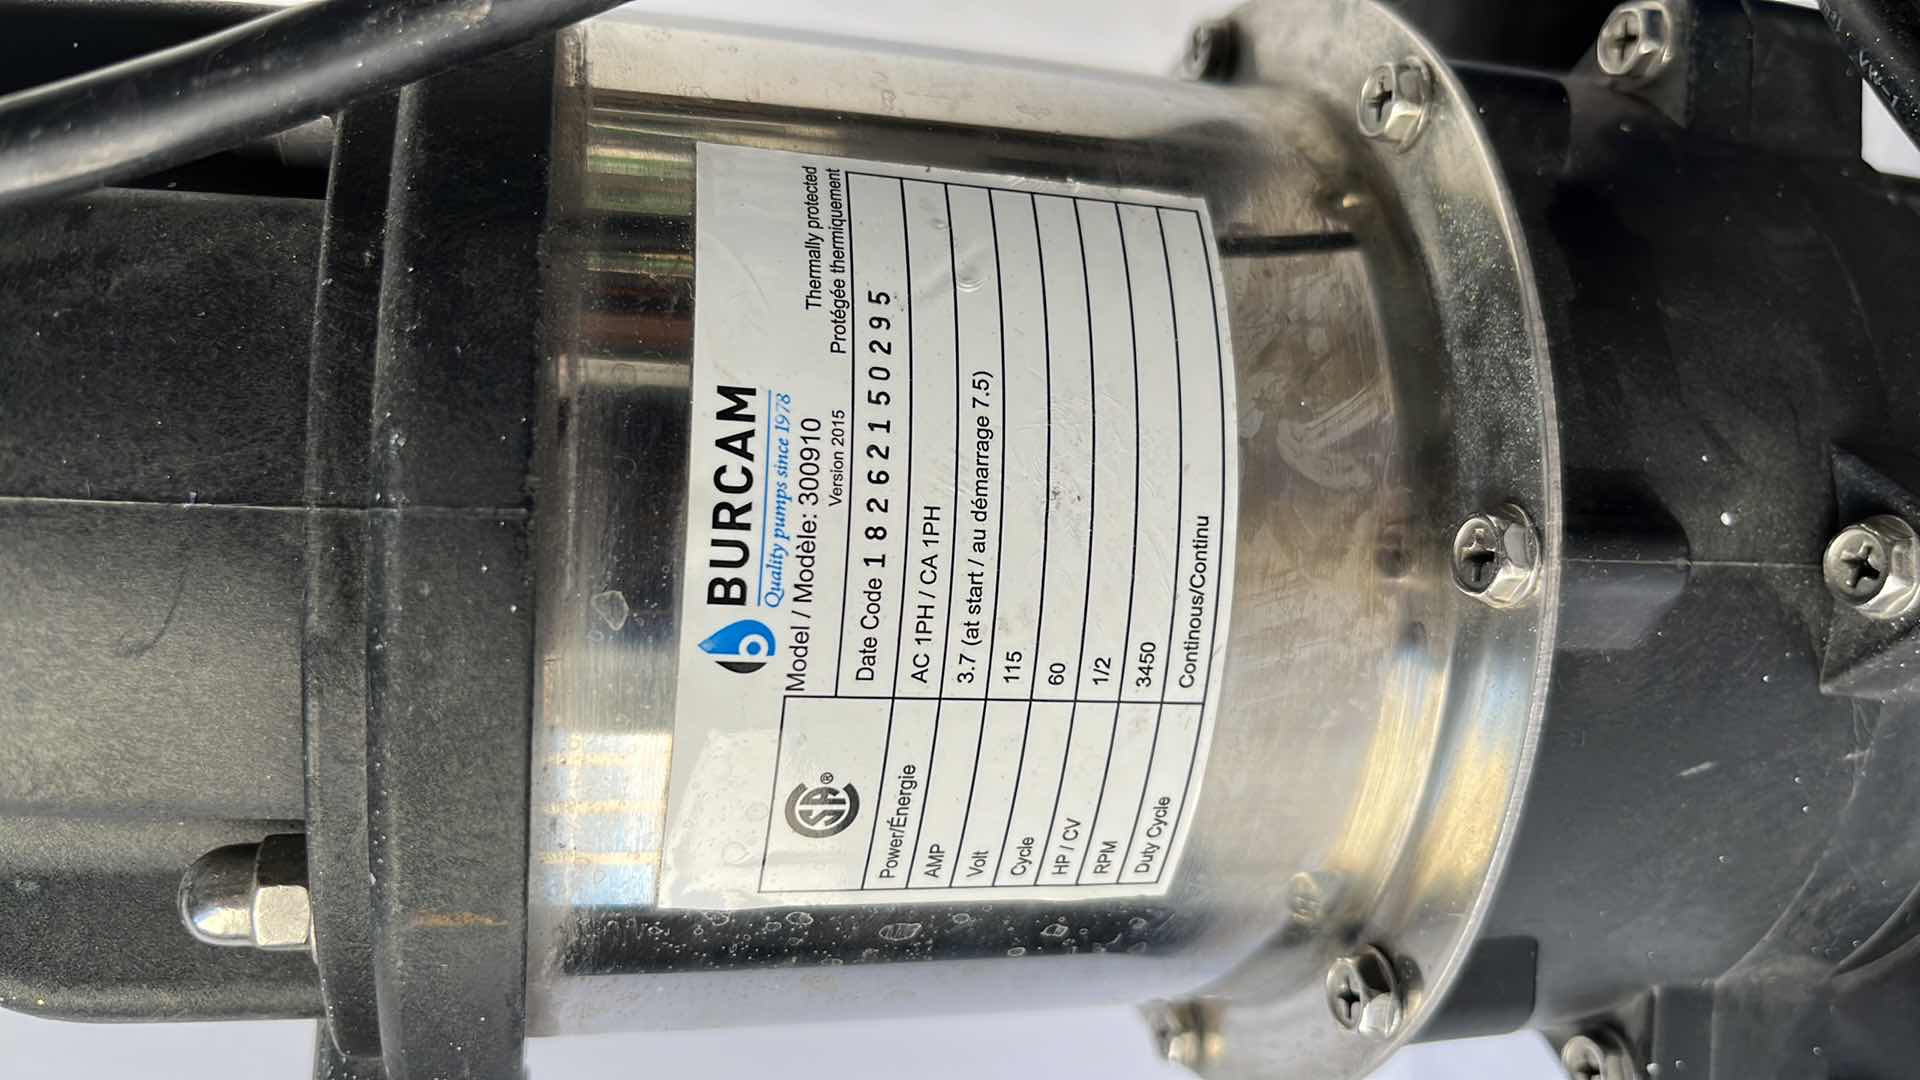 Photo 5 of 1/2HP SUBM. WATERFALL PUMP
CONTINUOUS DUTY 115V (MODEL 300910)